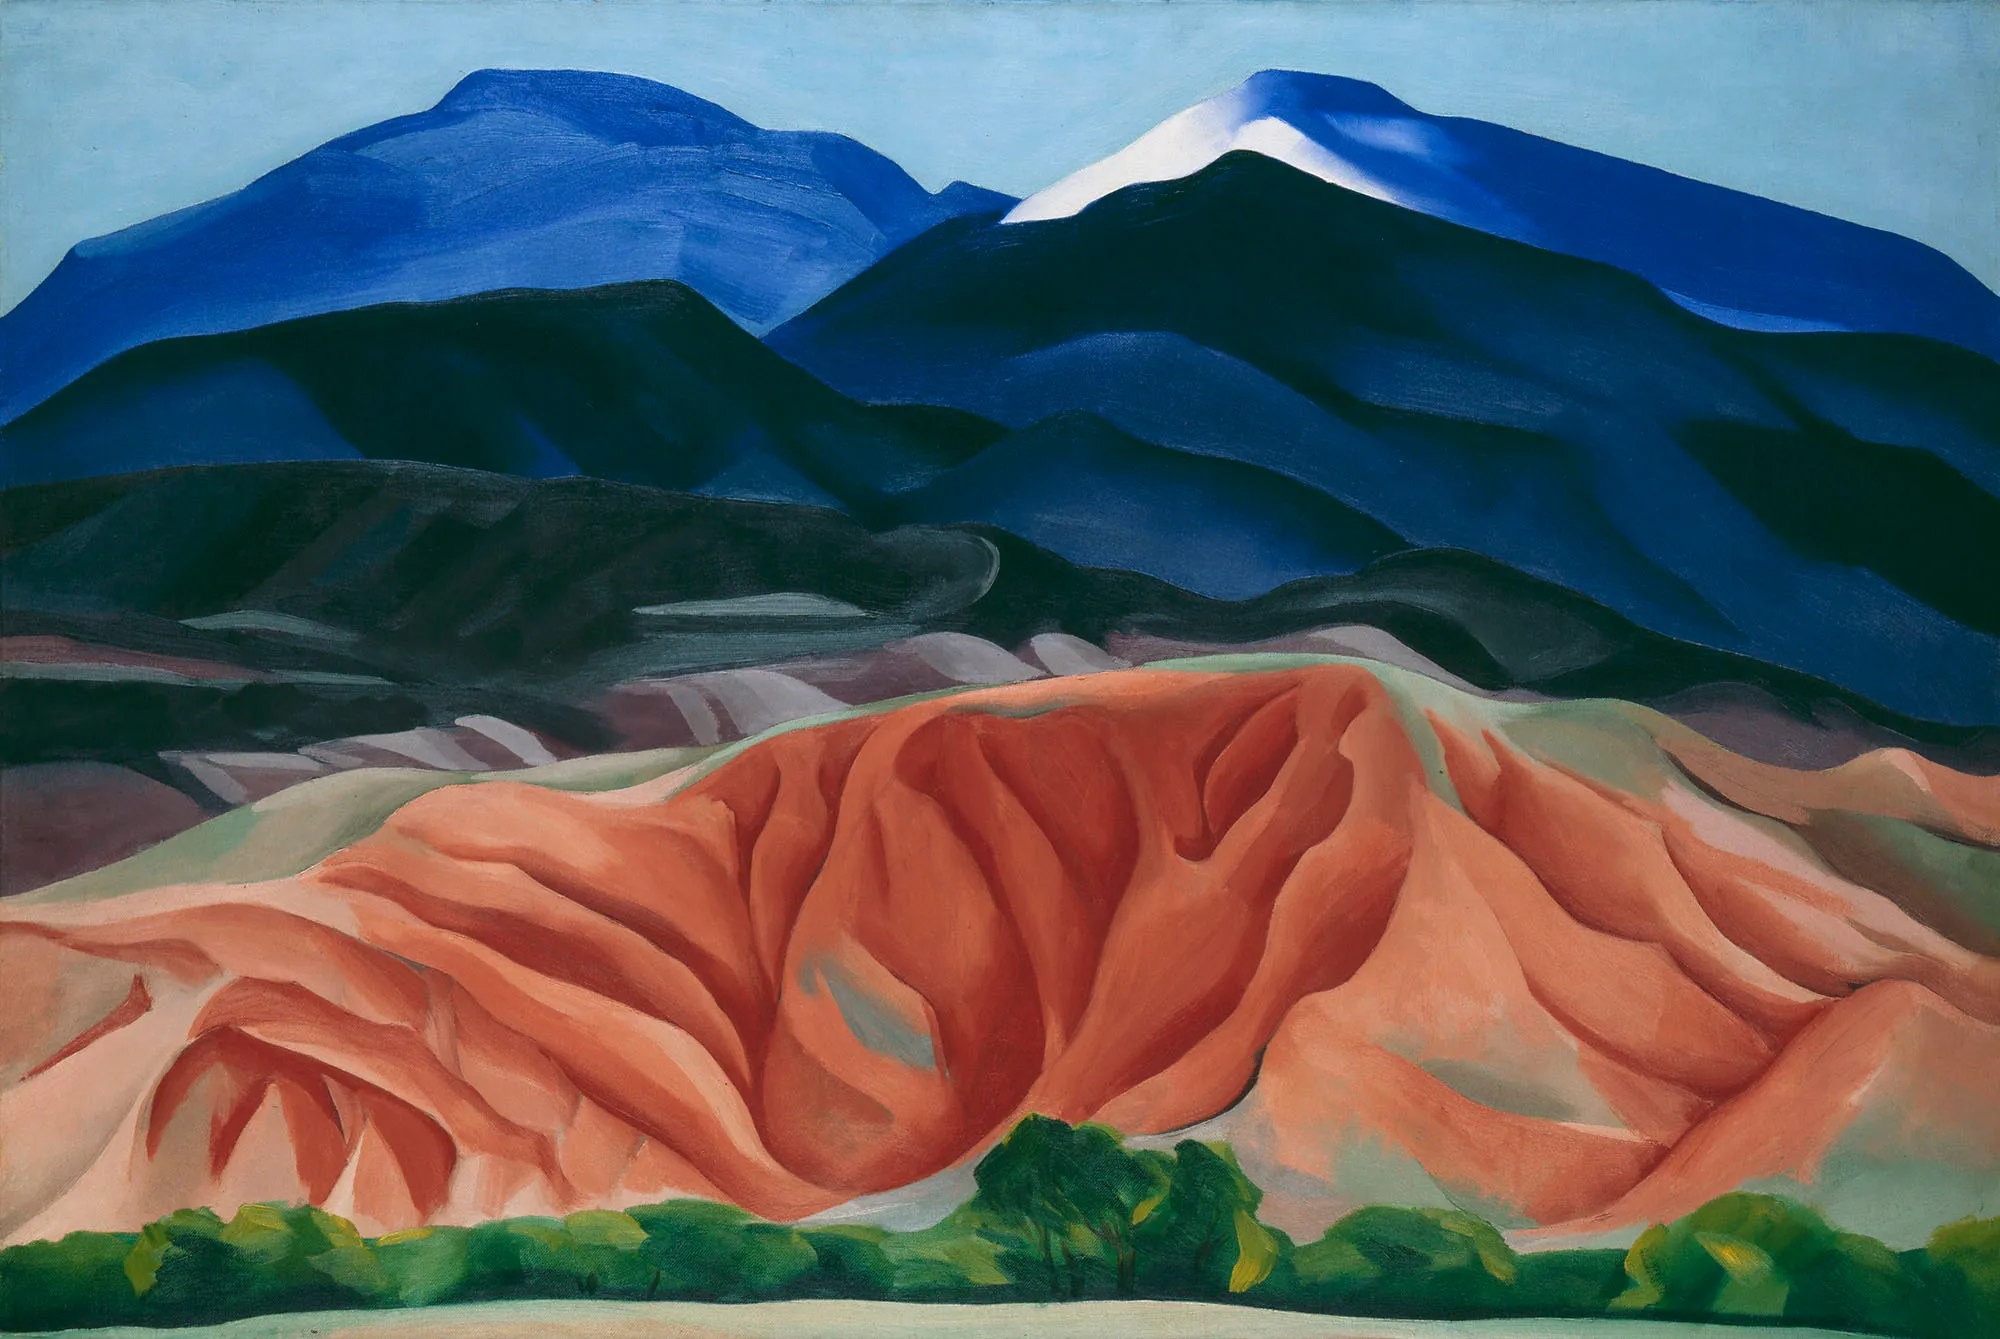 More than just flowers: Georgia O'Keeffe at the Art Gallery of Ontario